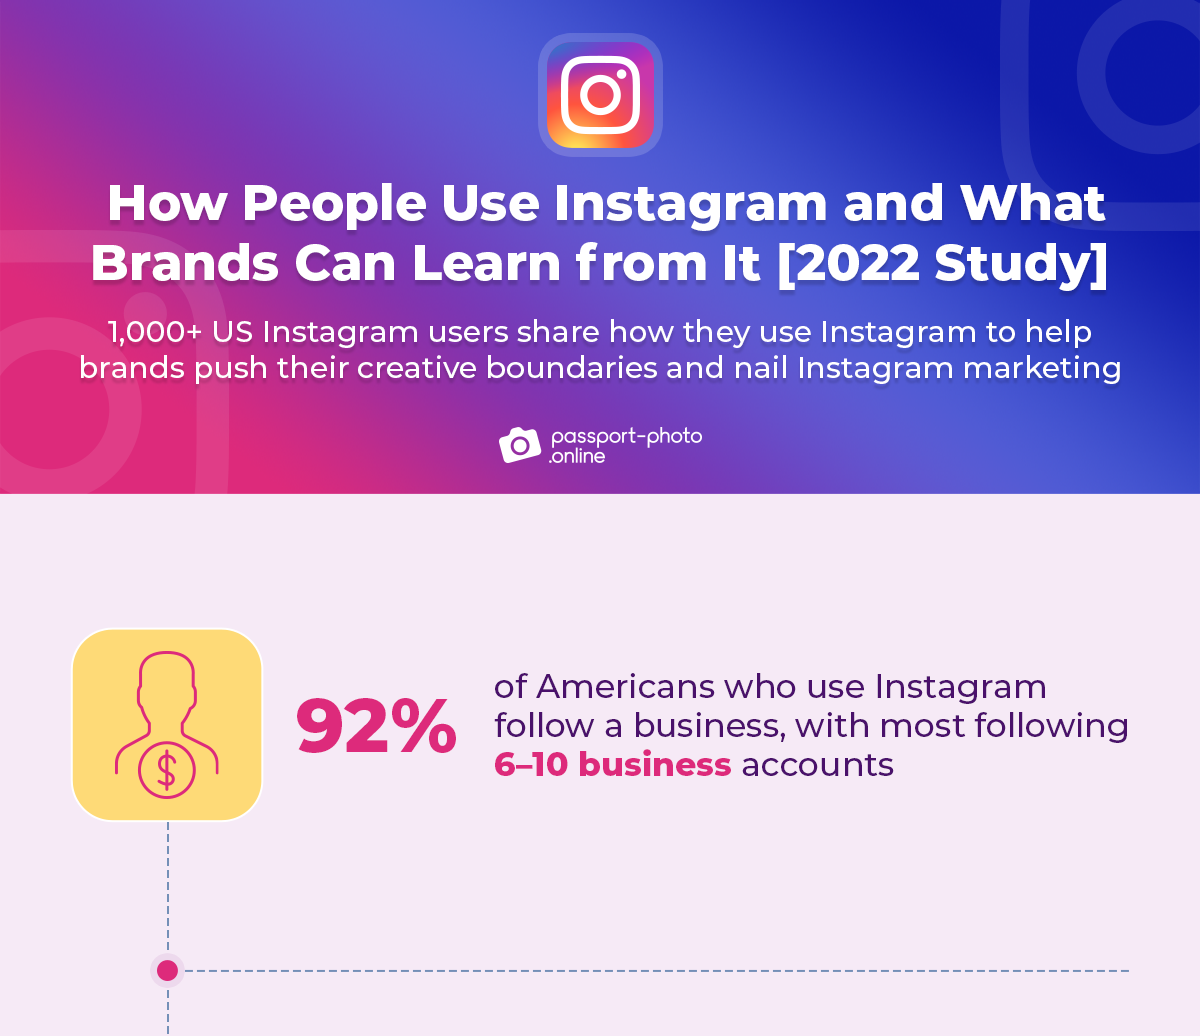 26 Most Engaging Instagram Brands (and What We Can Learn From Them)